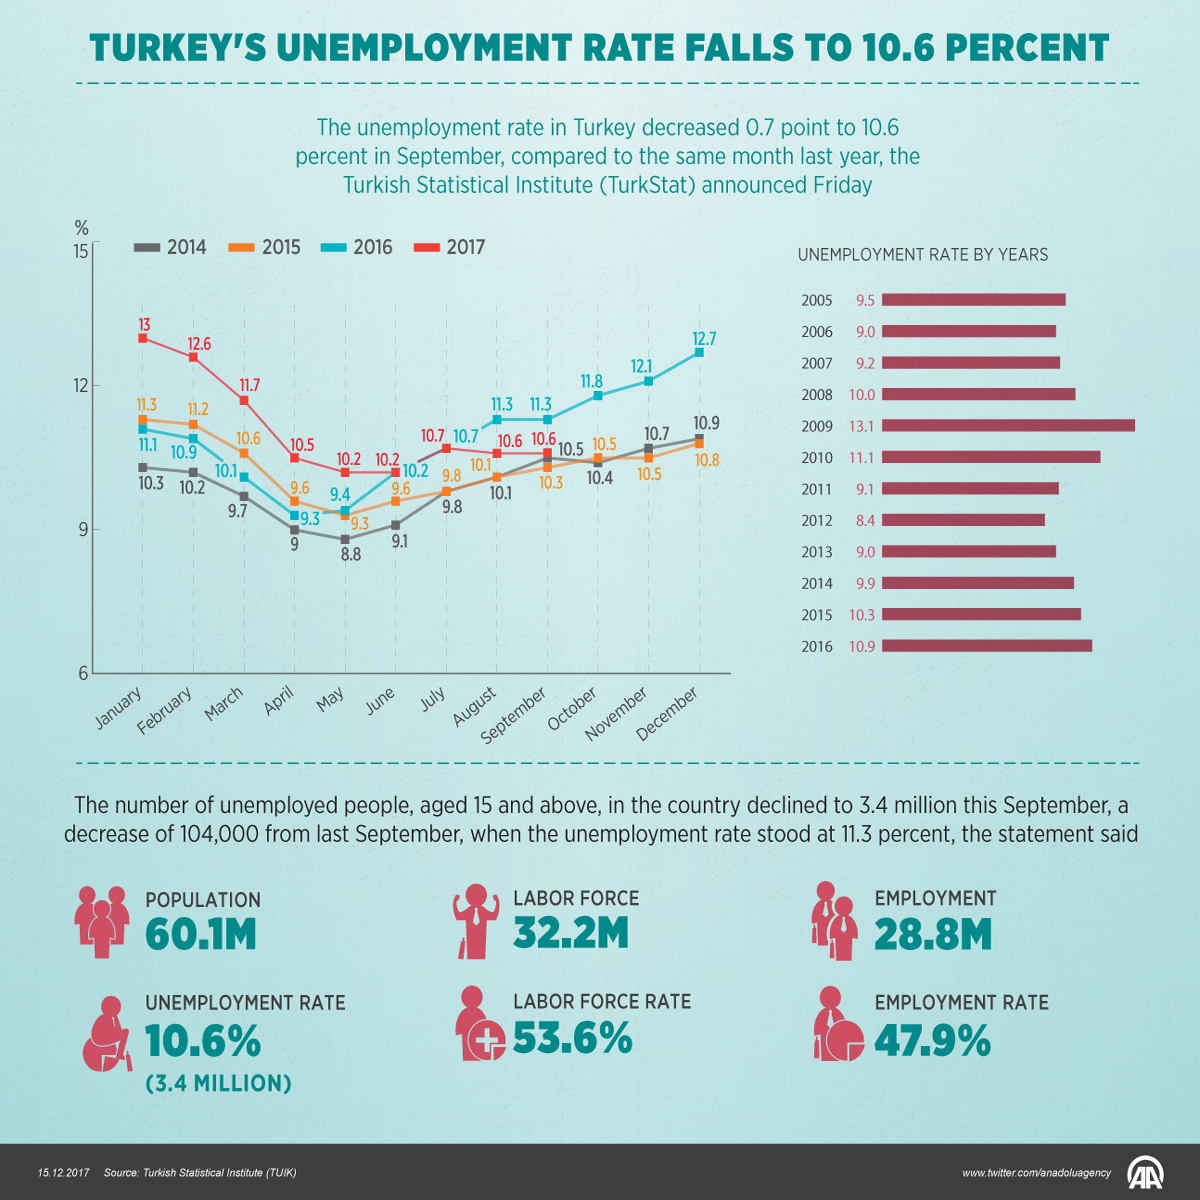 Turkey's unemployment rate falls to 10.6 percent